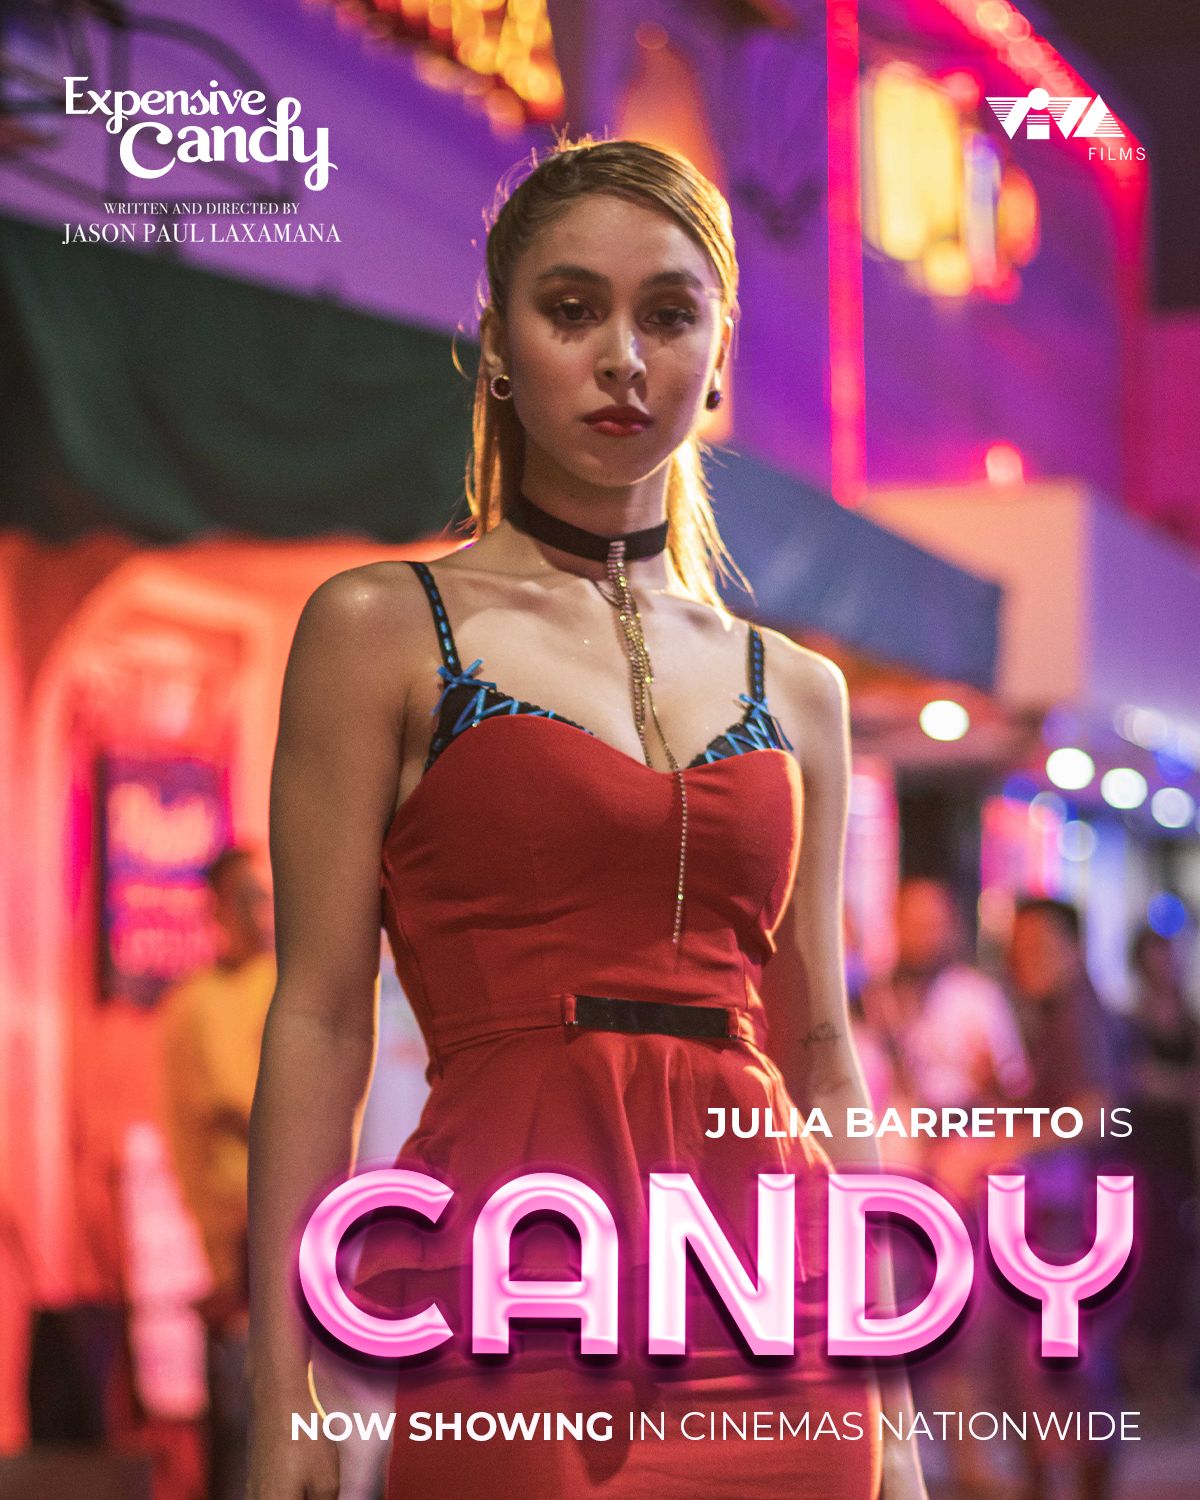 Expensive Candy poster 4